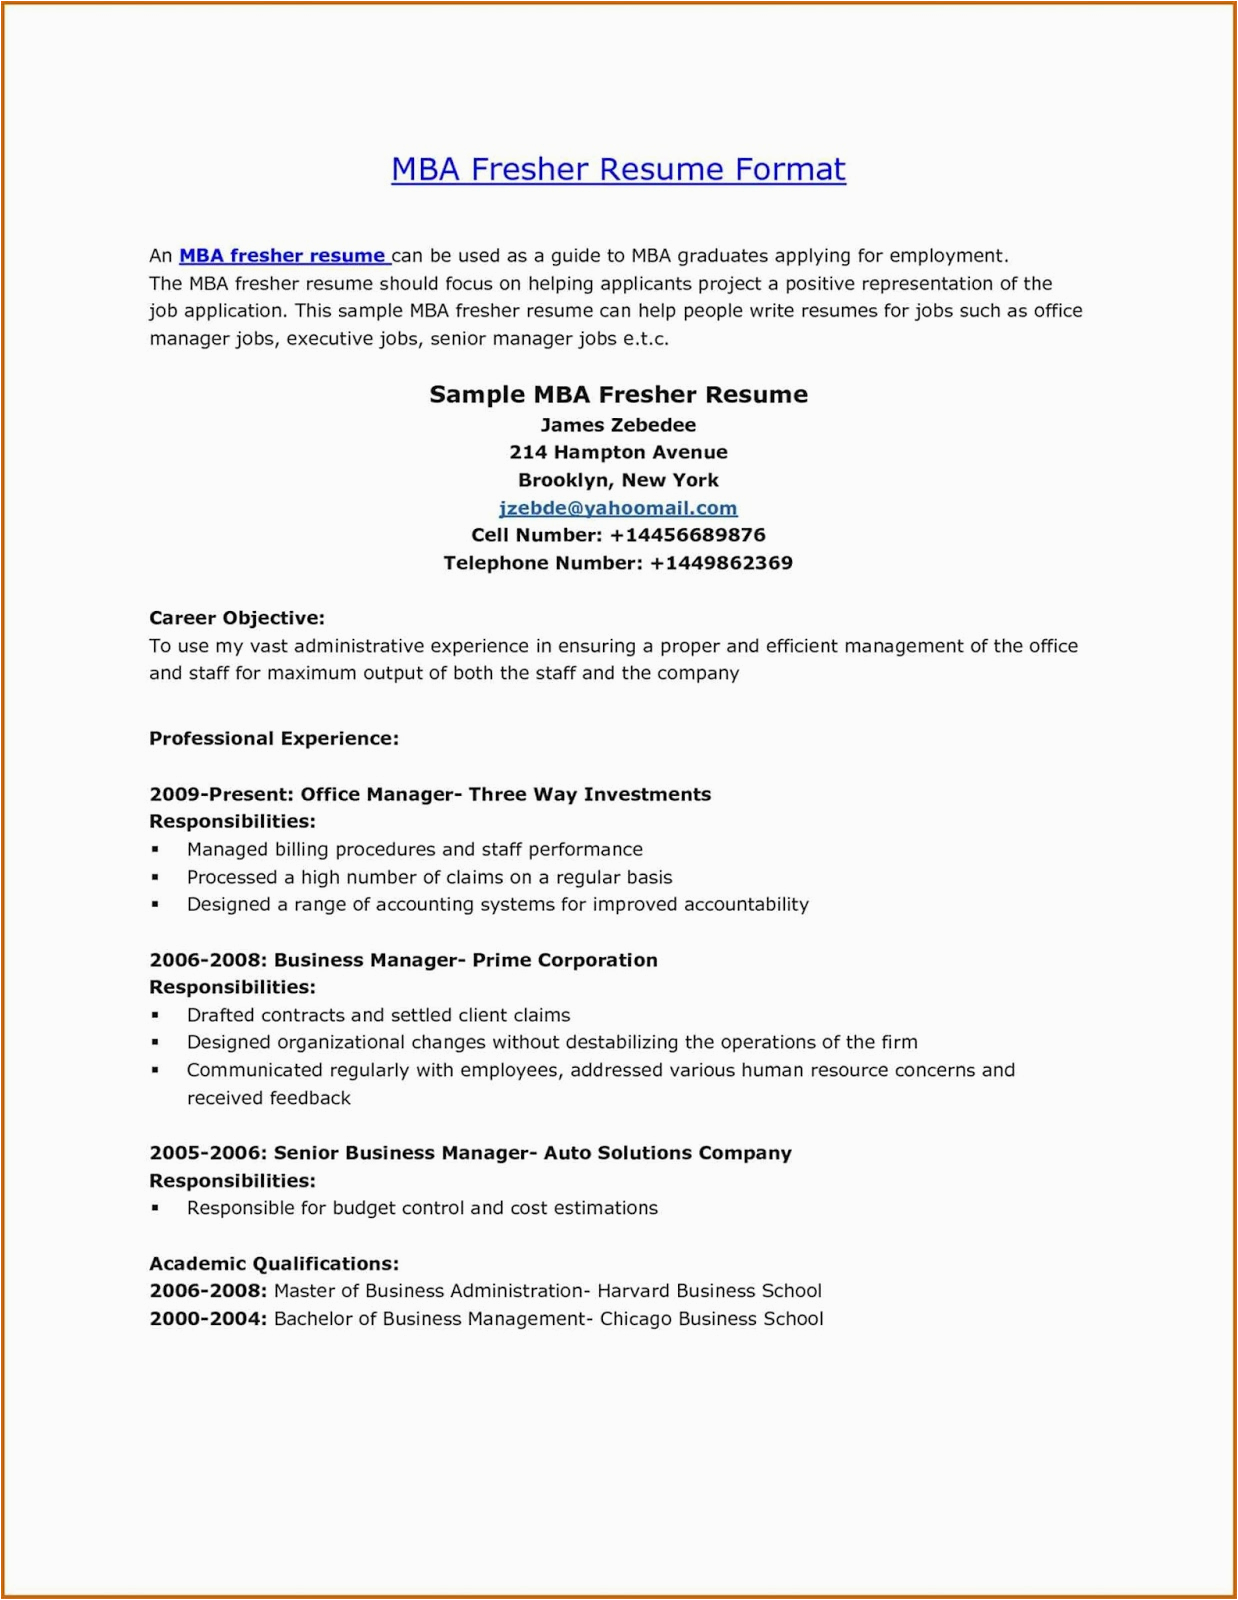 Mba Hr Resume Samples for Experienced Mba Fresher Resume Scribd India